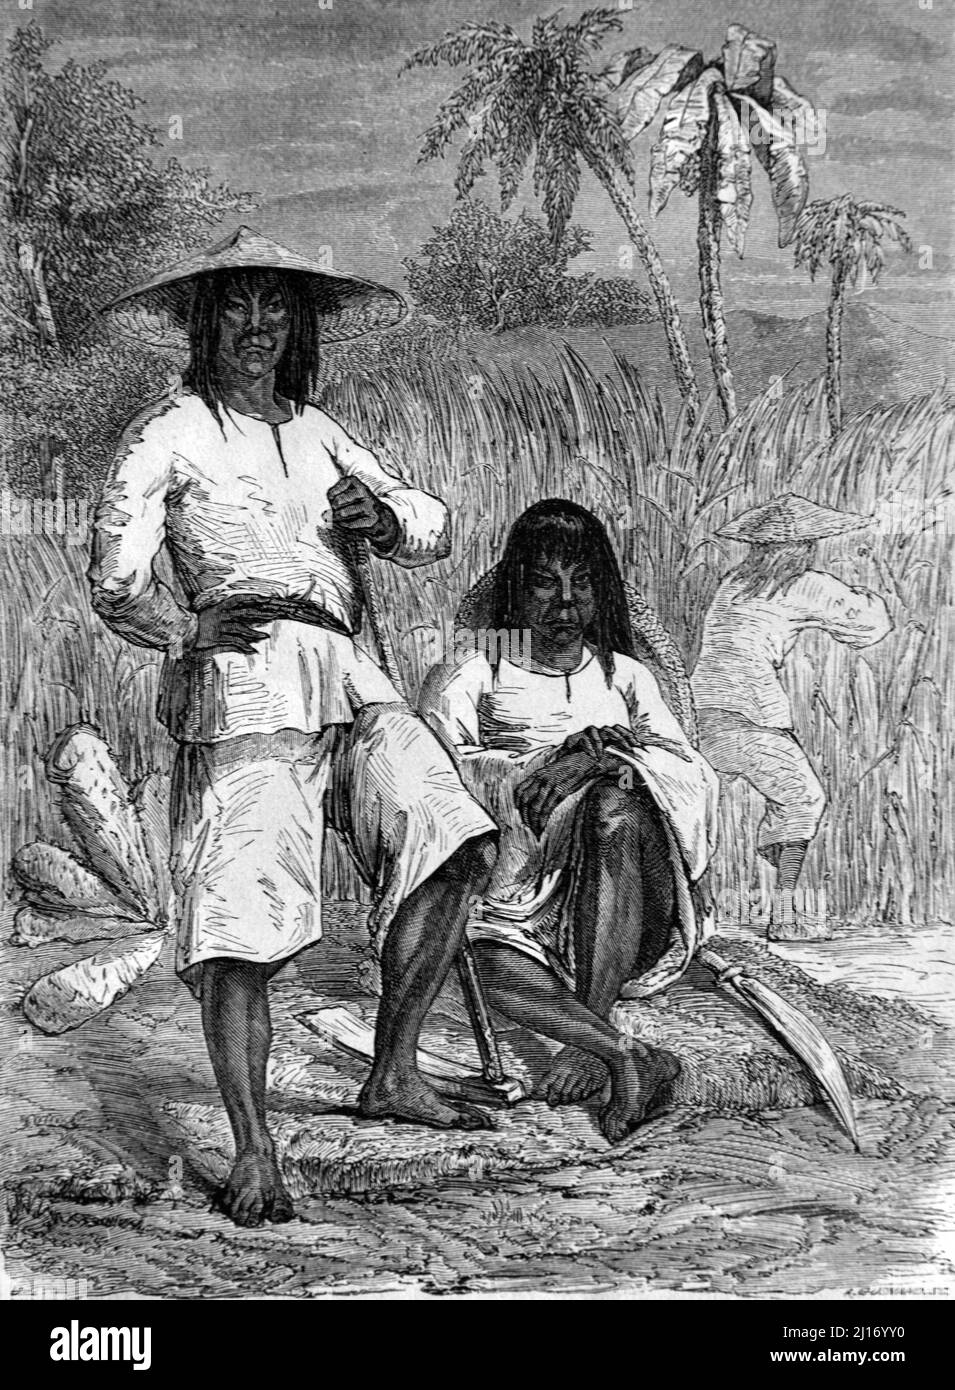 Chinese Coolies Working in Sugar Fields or Sugar Plantation Cuba. Vintage Illustration or Engraving 1860. Stock Photo